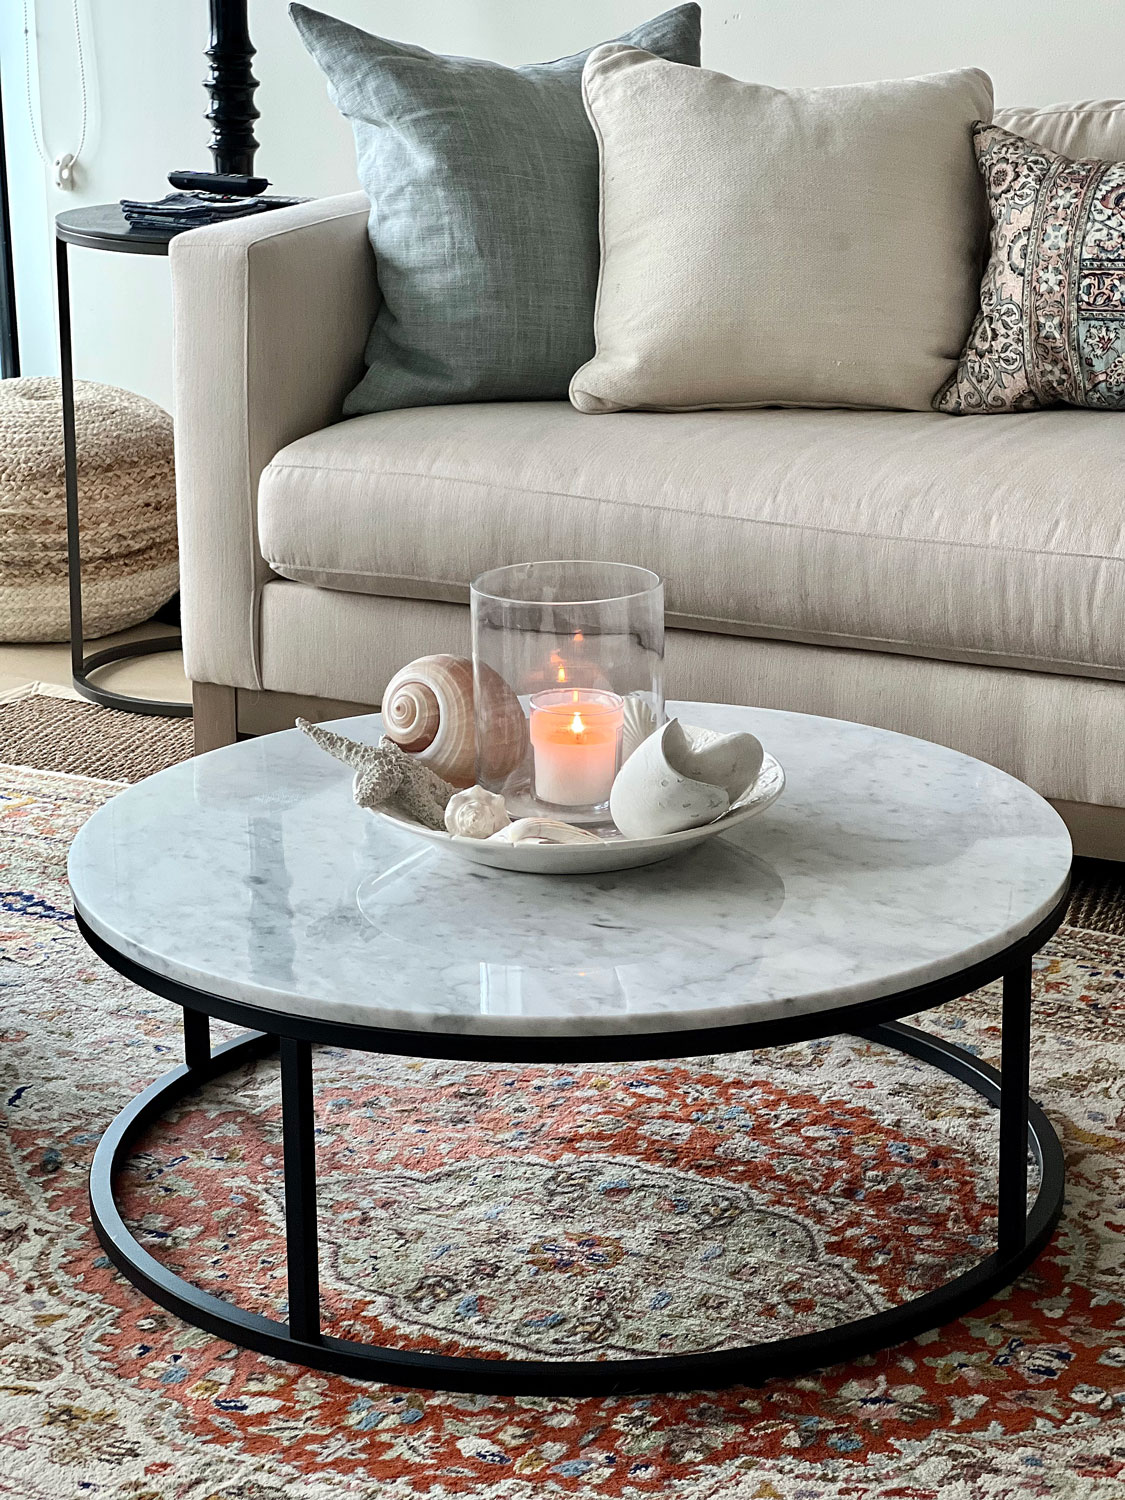 Round marble topped coffee table in downsized apartment